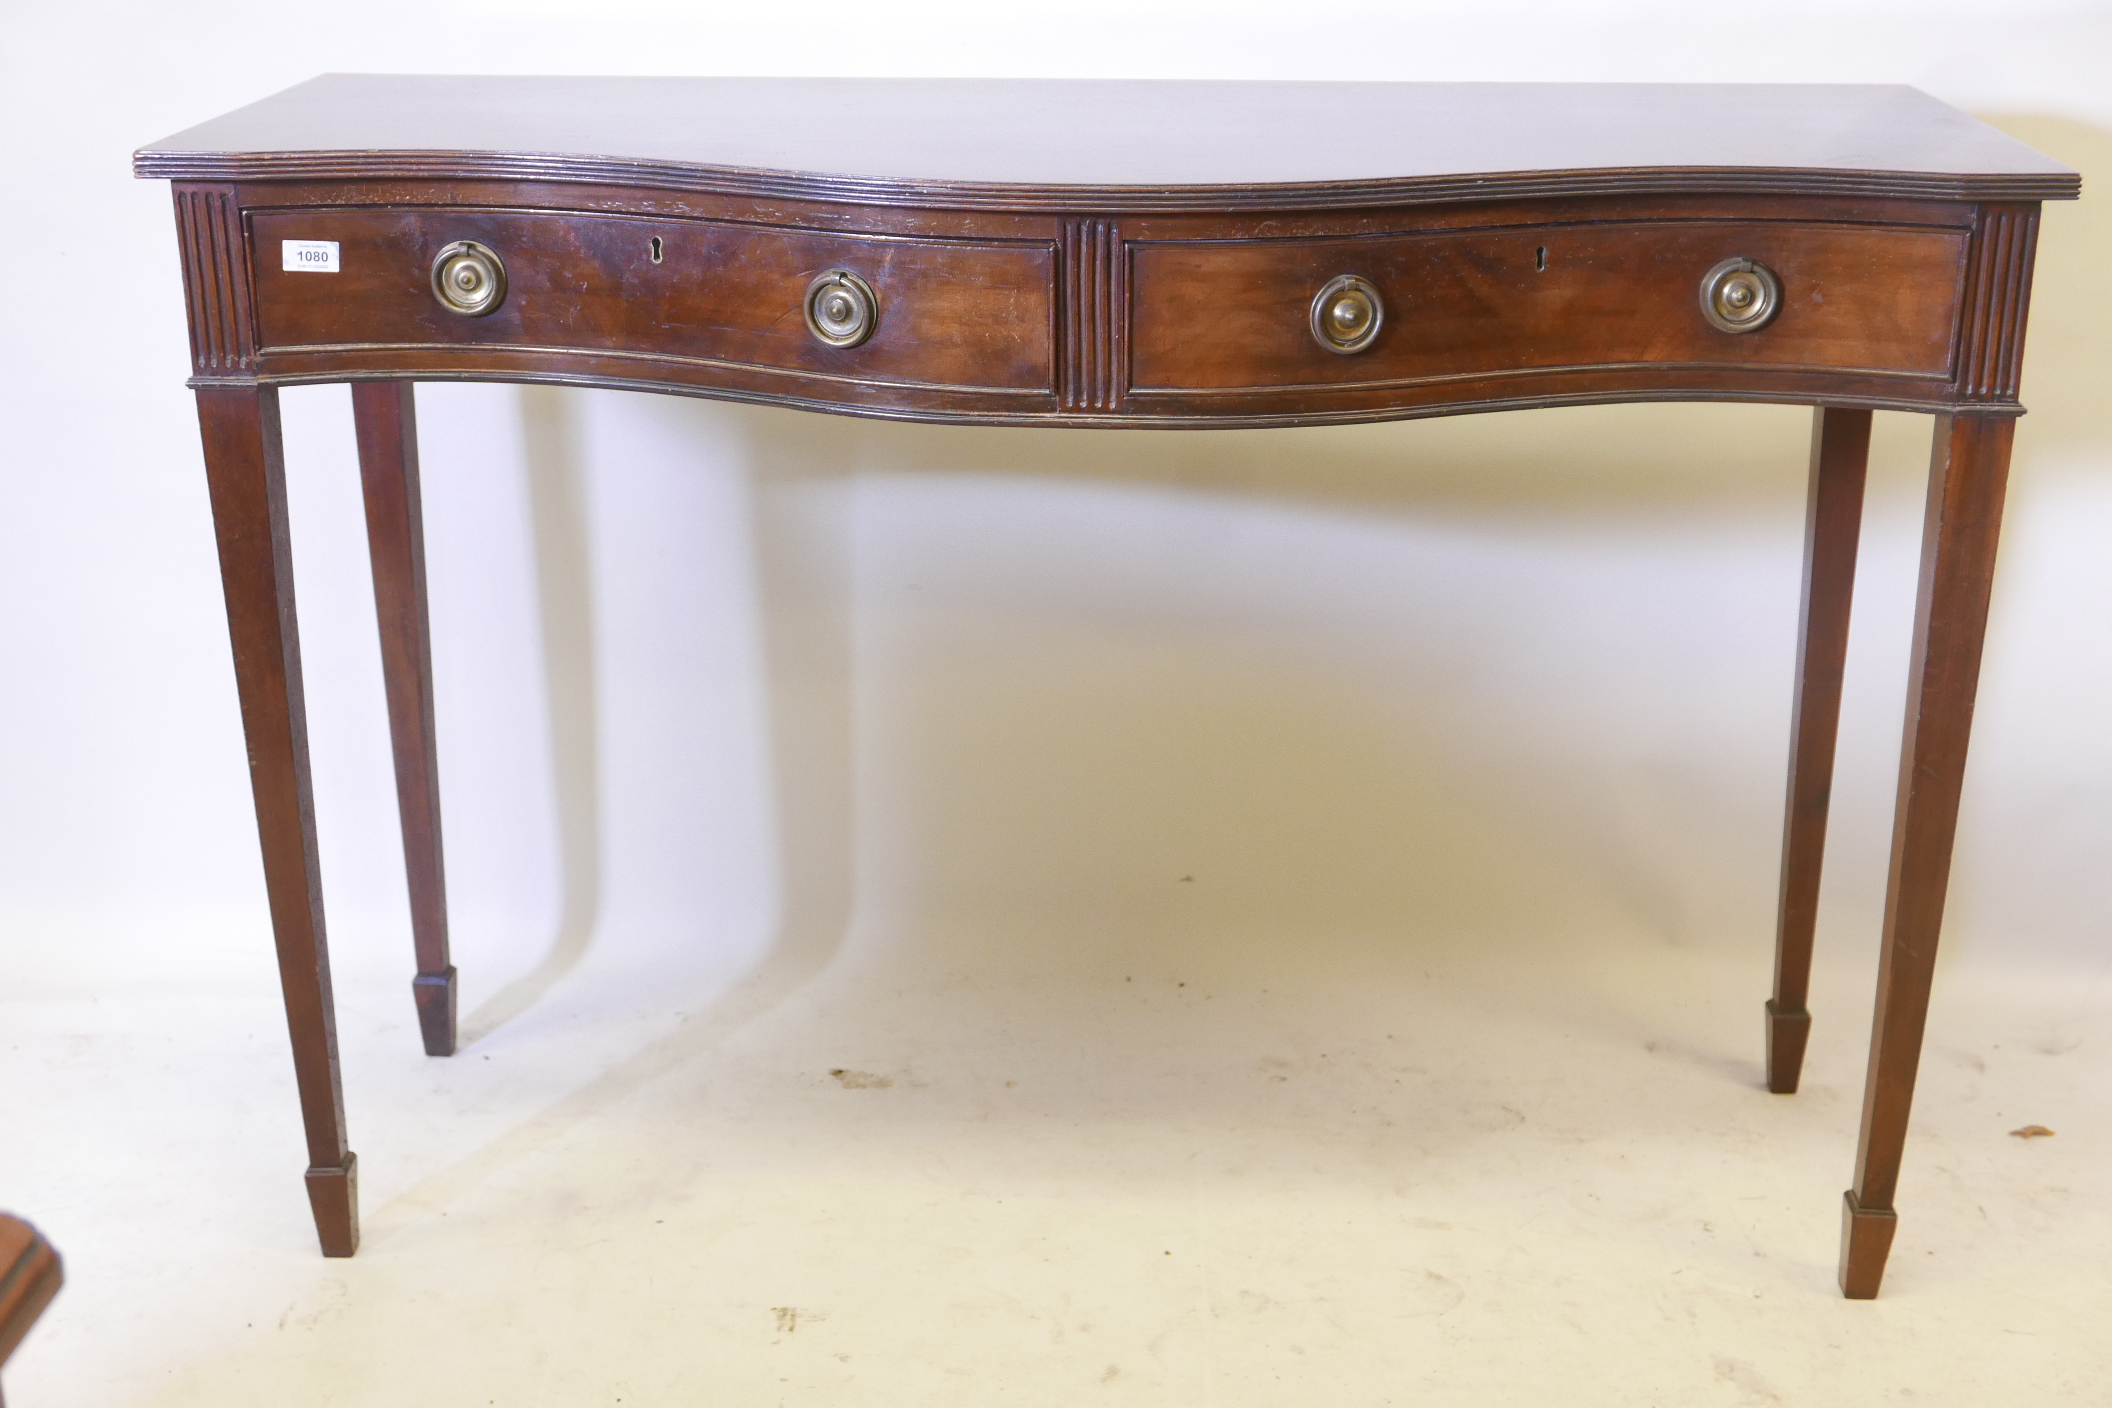 A C19th serpentine front mahogany serving table, with reeded edge top and two drawers with ring - Image 2 of 5